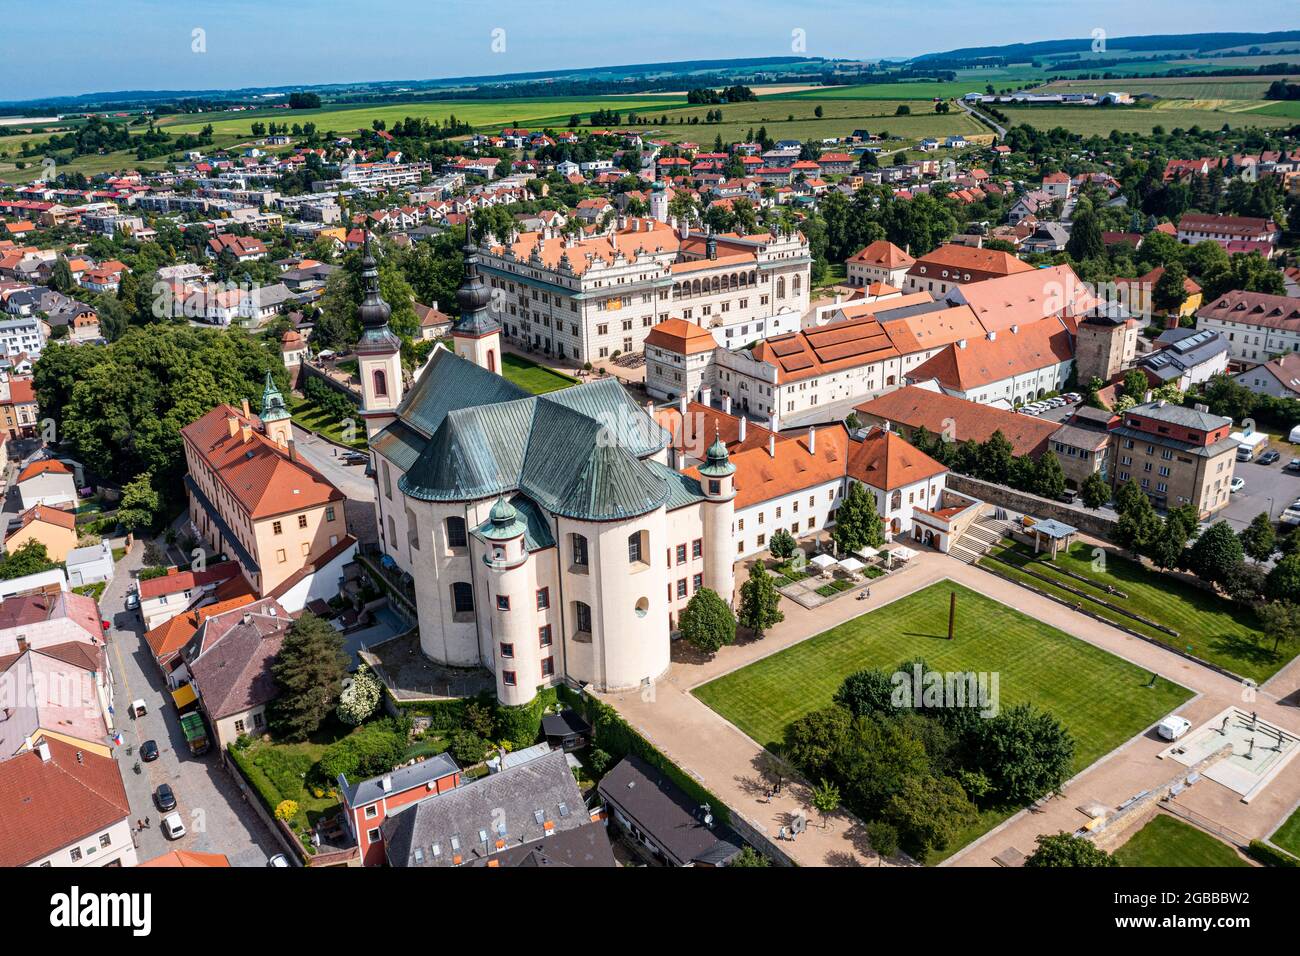 Aerial of the Renaissance chateau in Litomysl, UNESCO World Heritage Site, Czech Republic, Europe Stock Photo